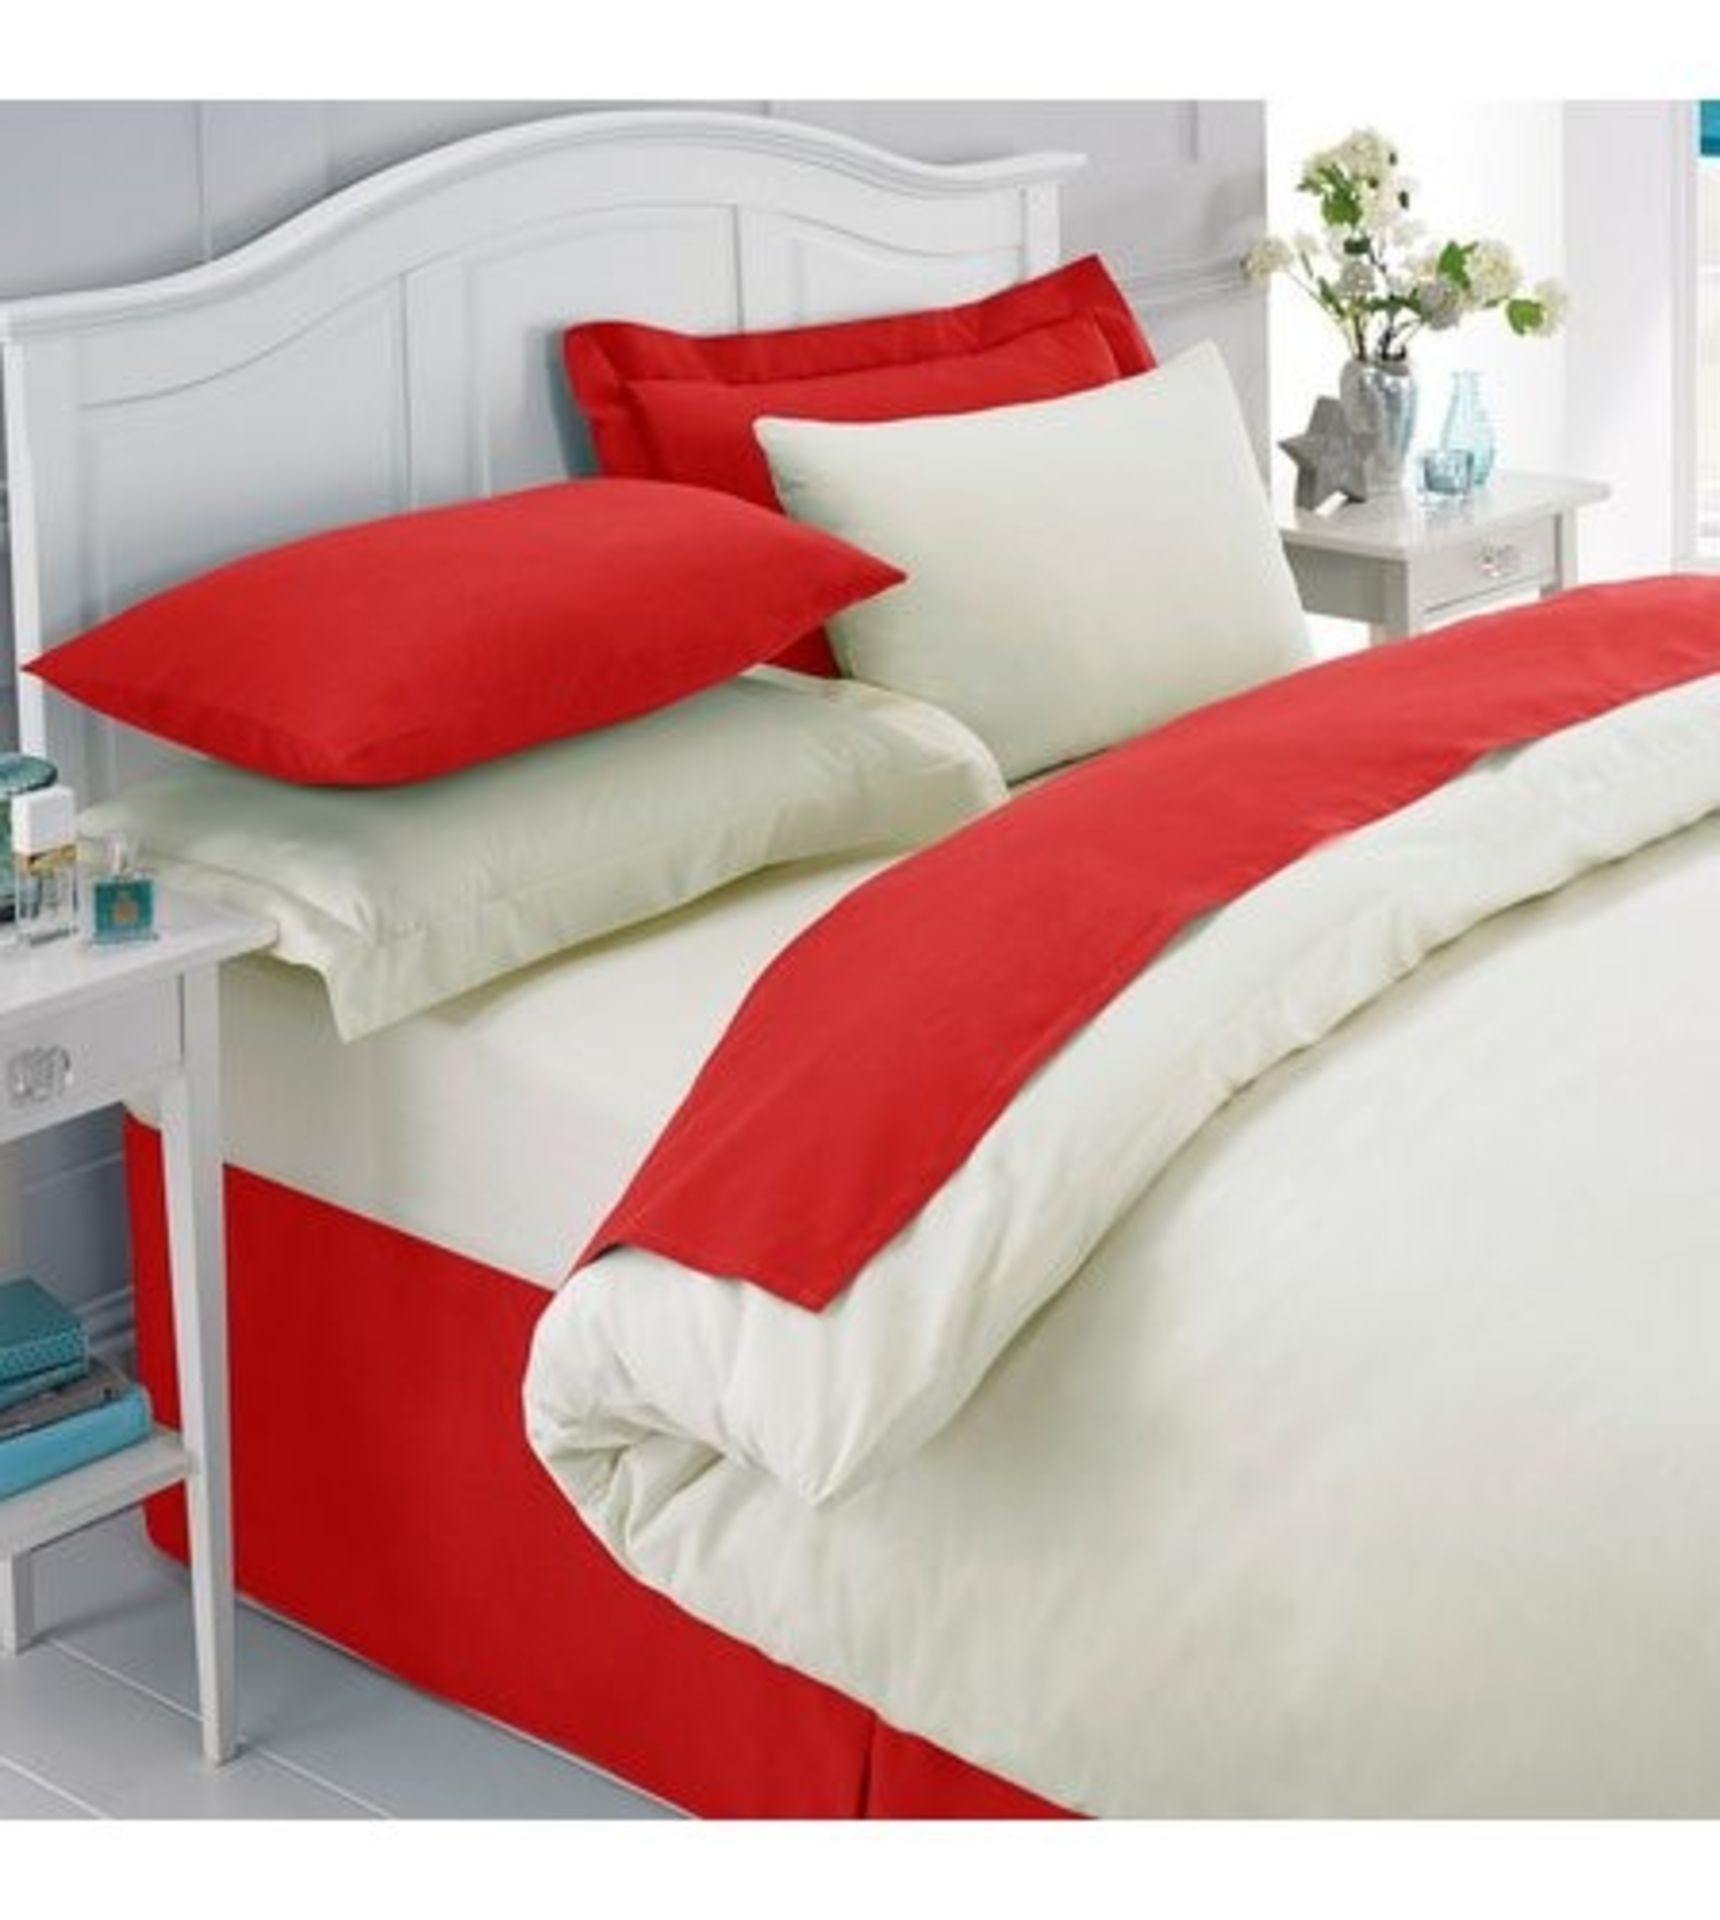 1 AS NEW BAGGED PERCALE 180 COUNT PLAIN DYED DOUBLE FITTED SHEET IN RED (VIEWING HIGHLY